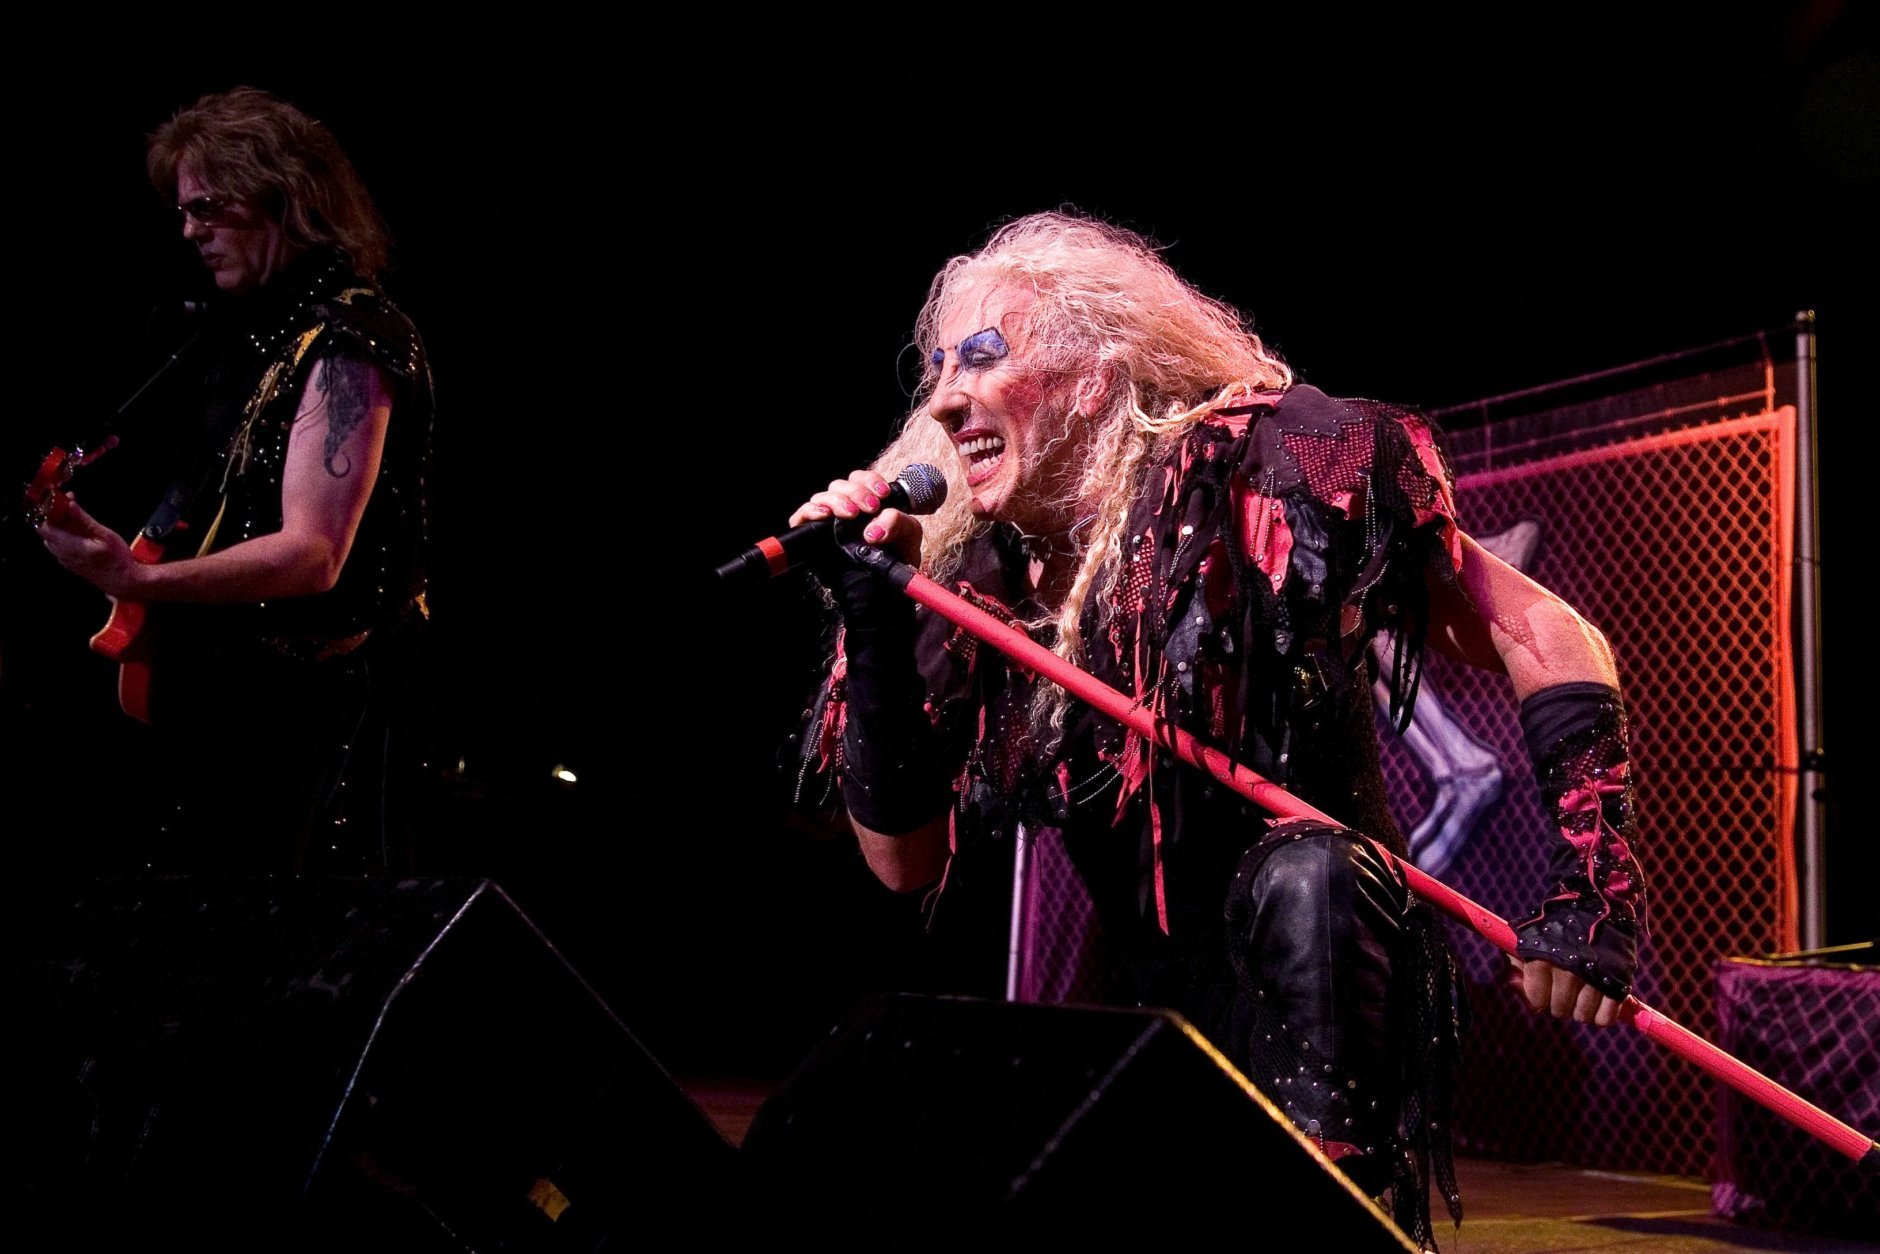 Twisted Sister at M3 Rock Festival. (Dave Barnhouser/13th Hour Photography)